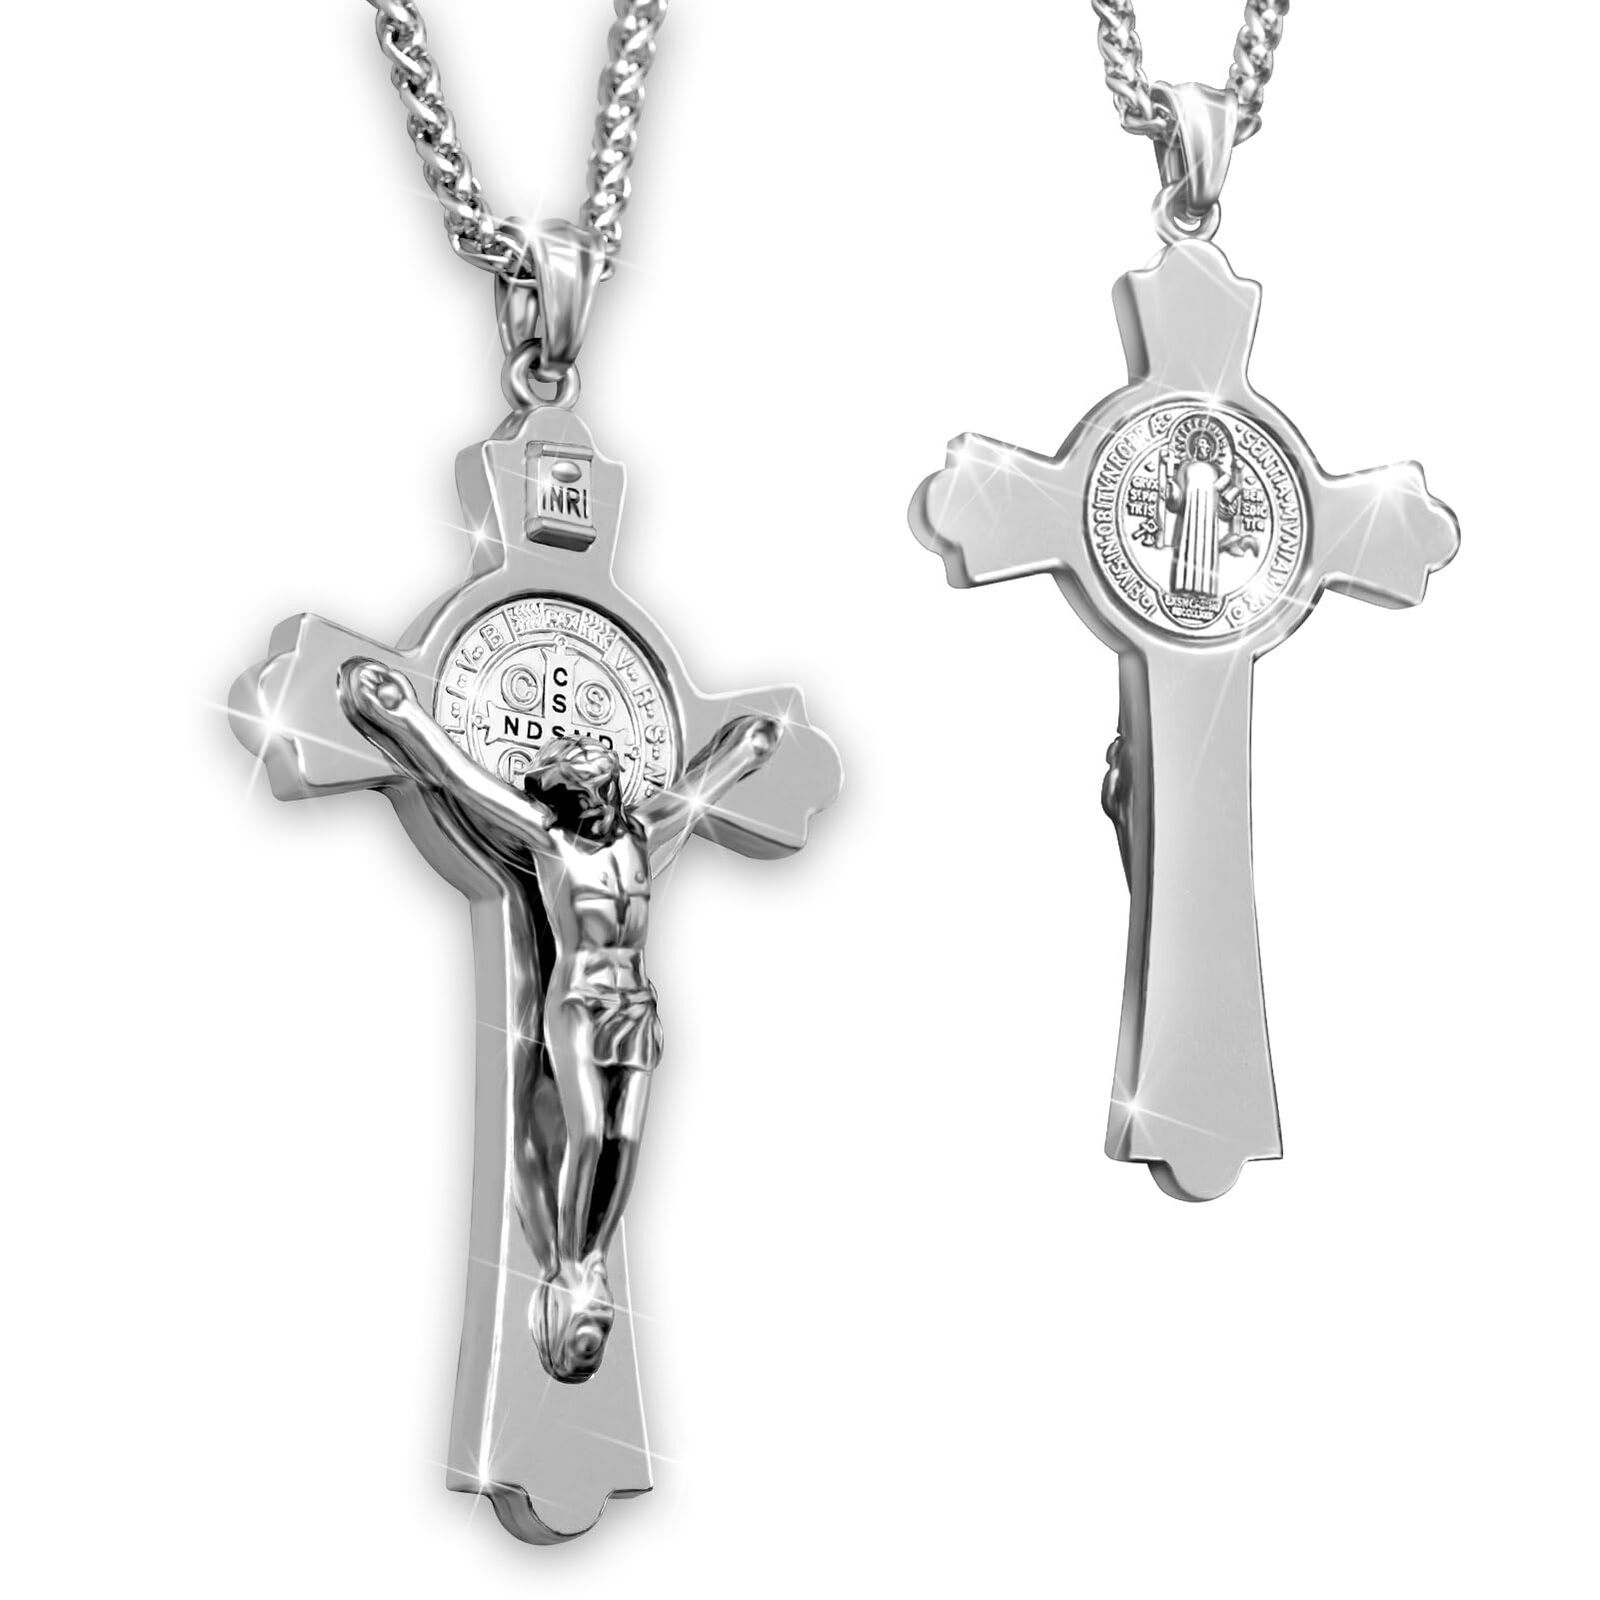 St Benedict Crucifix Necklace Saint Benedict Medal Cross Bless Safety Religio